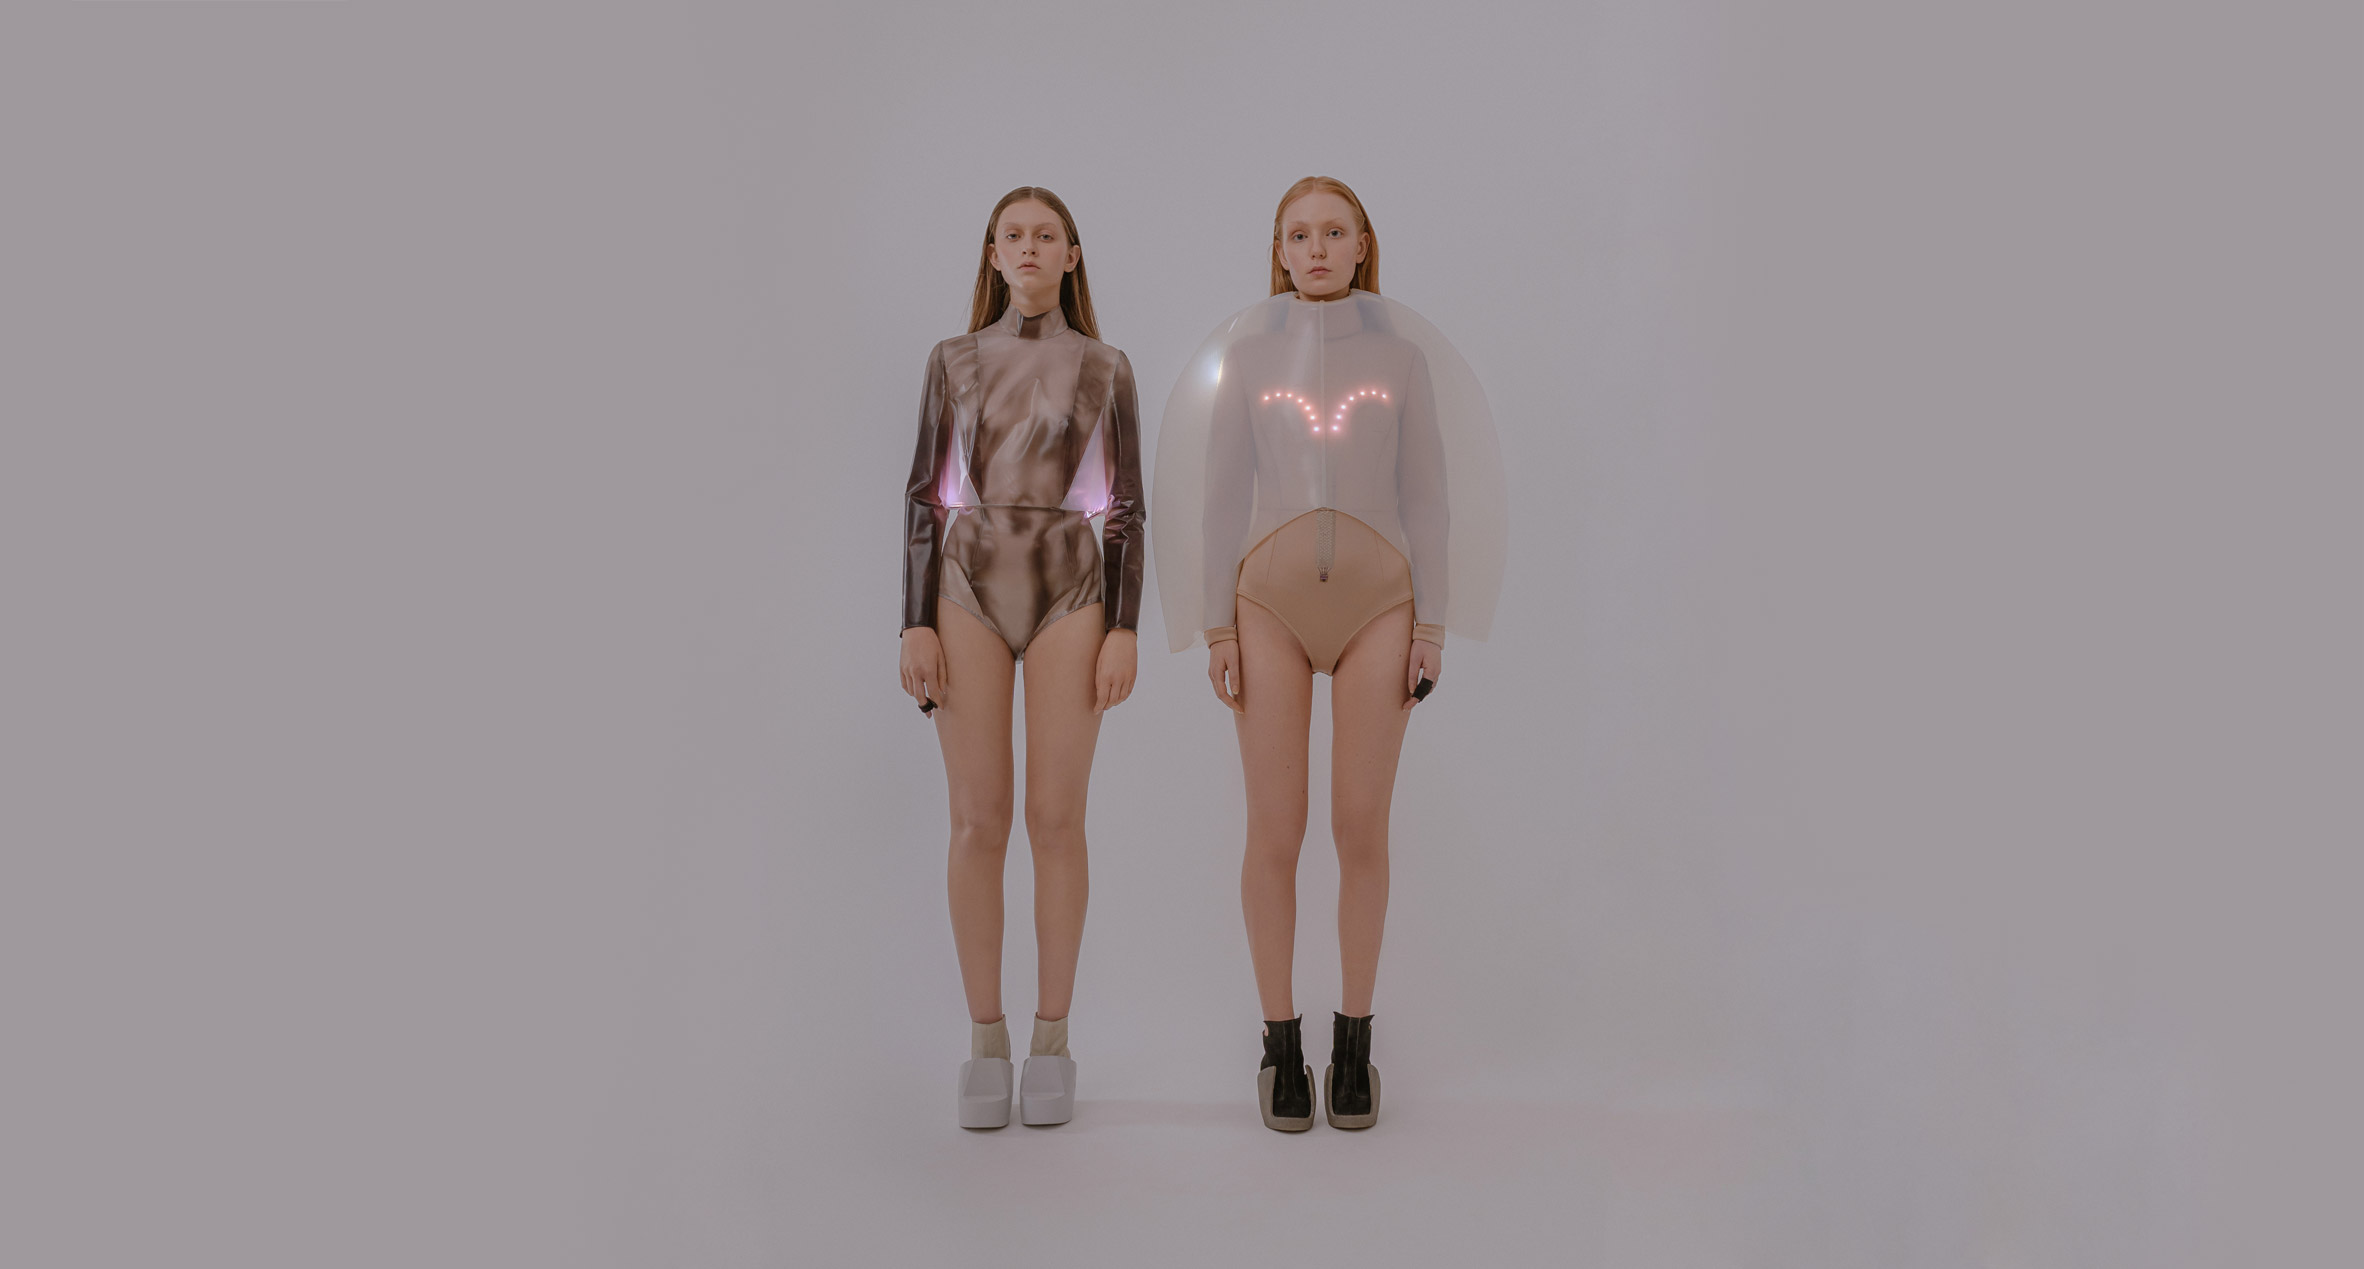 Two models stand next to each other wearing tops with LED lights